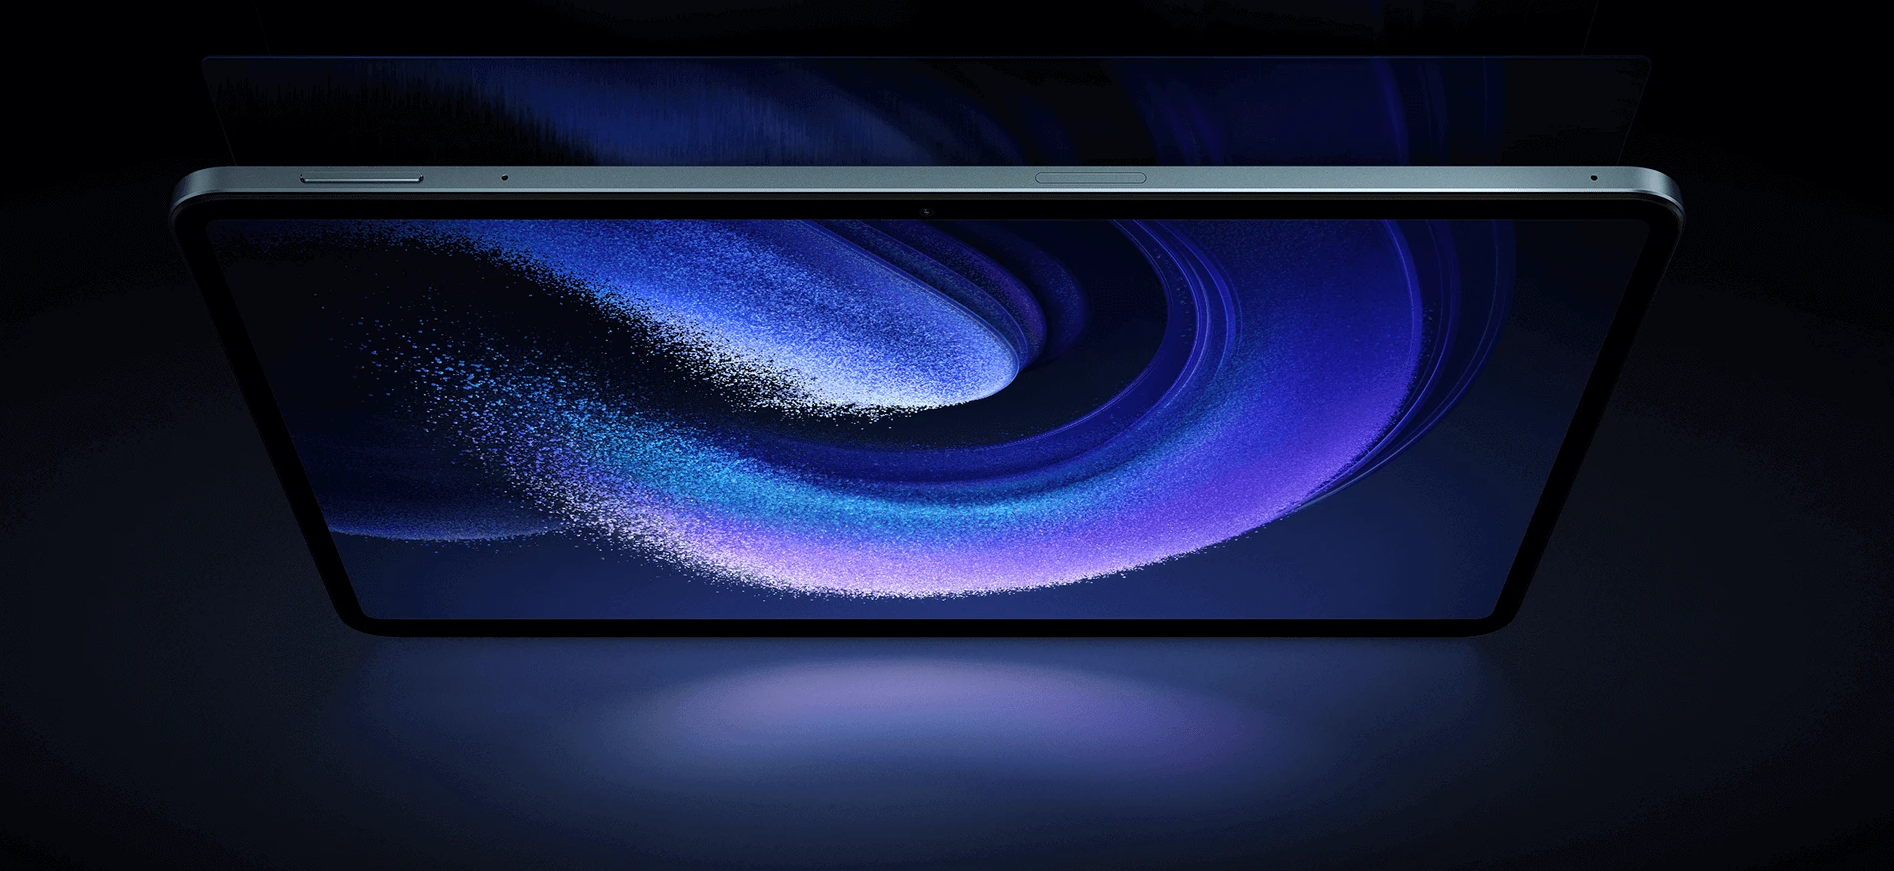 A Solid Mid-Range Option: Introducing the Xiaomi Pad 6 - Chargerlab